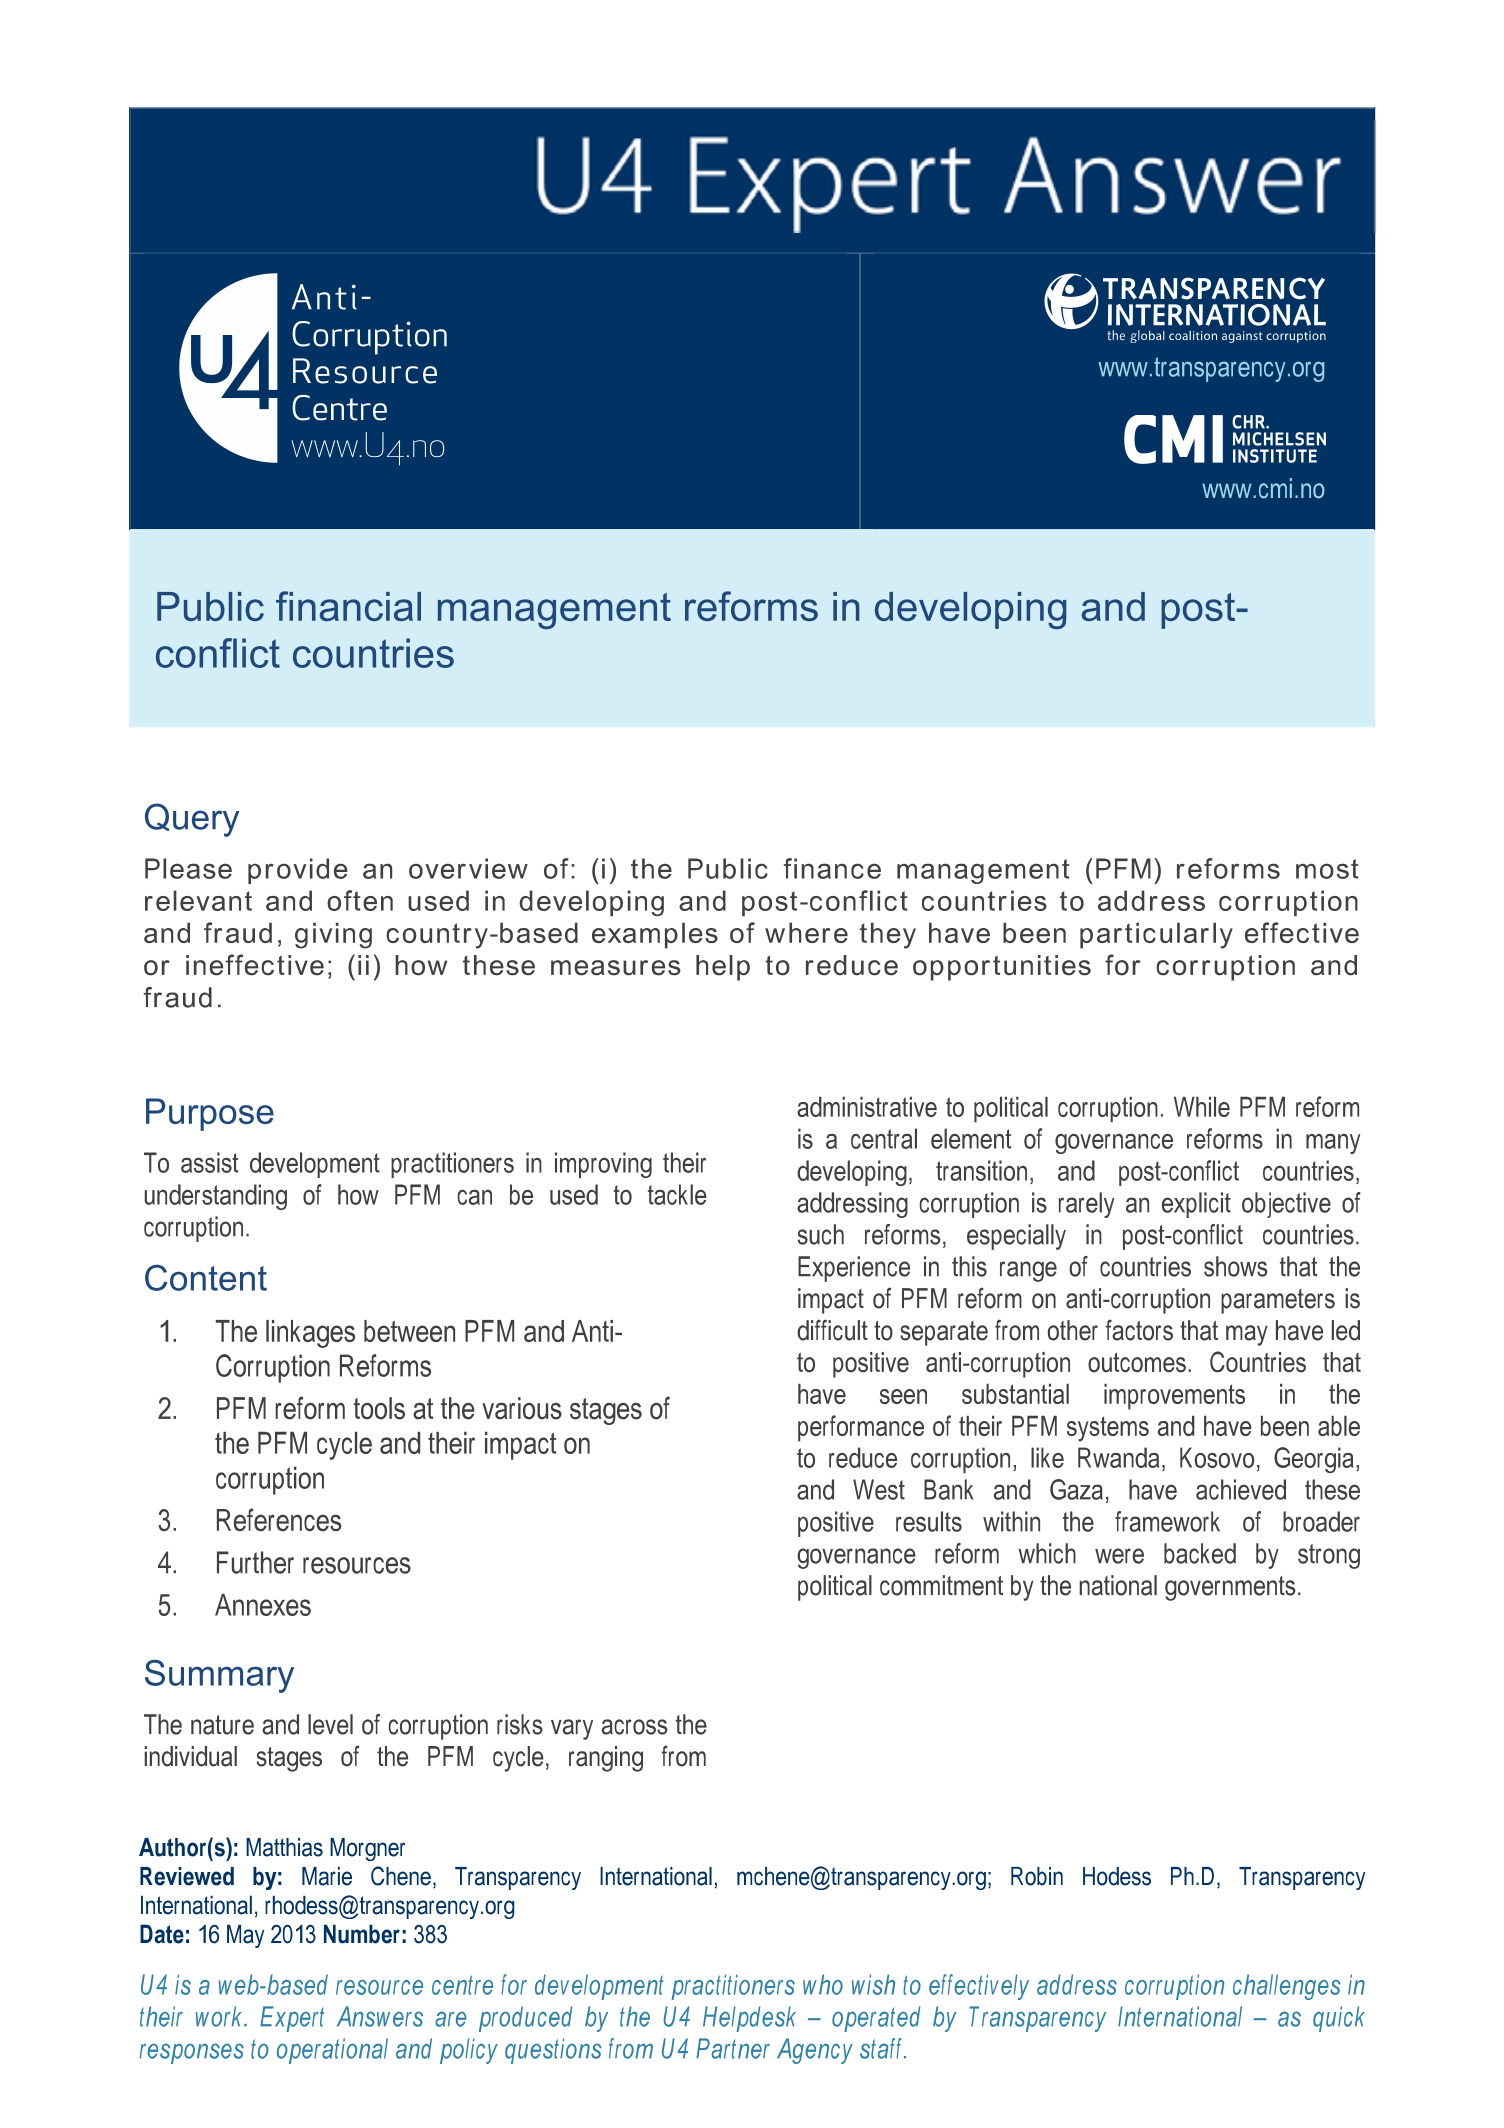 Public financial management reforms in developing and post-conflict countries